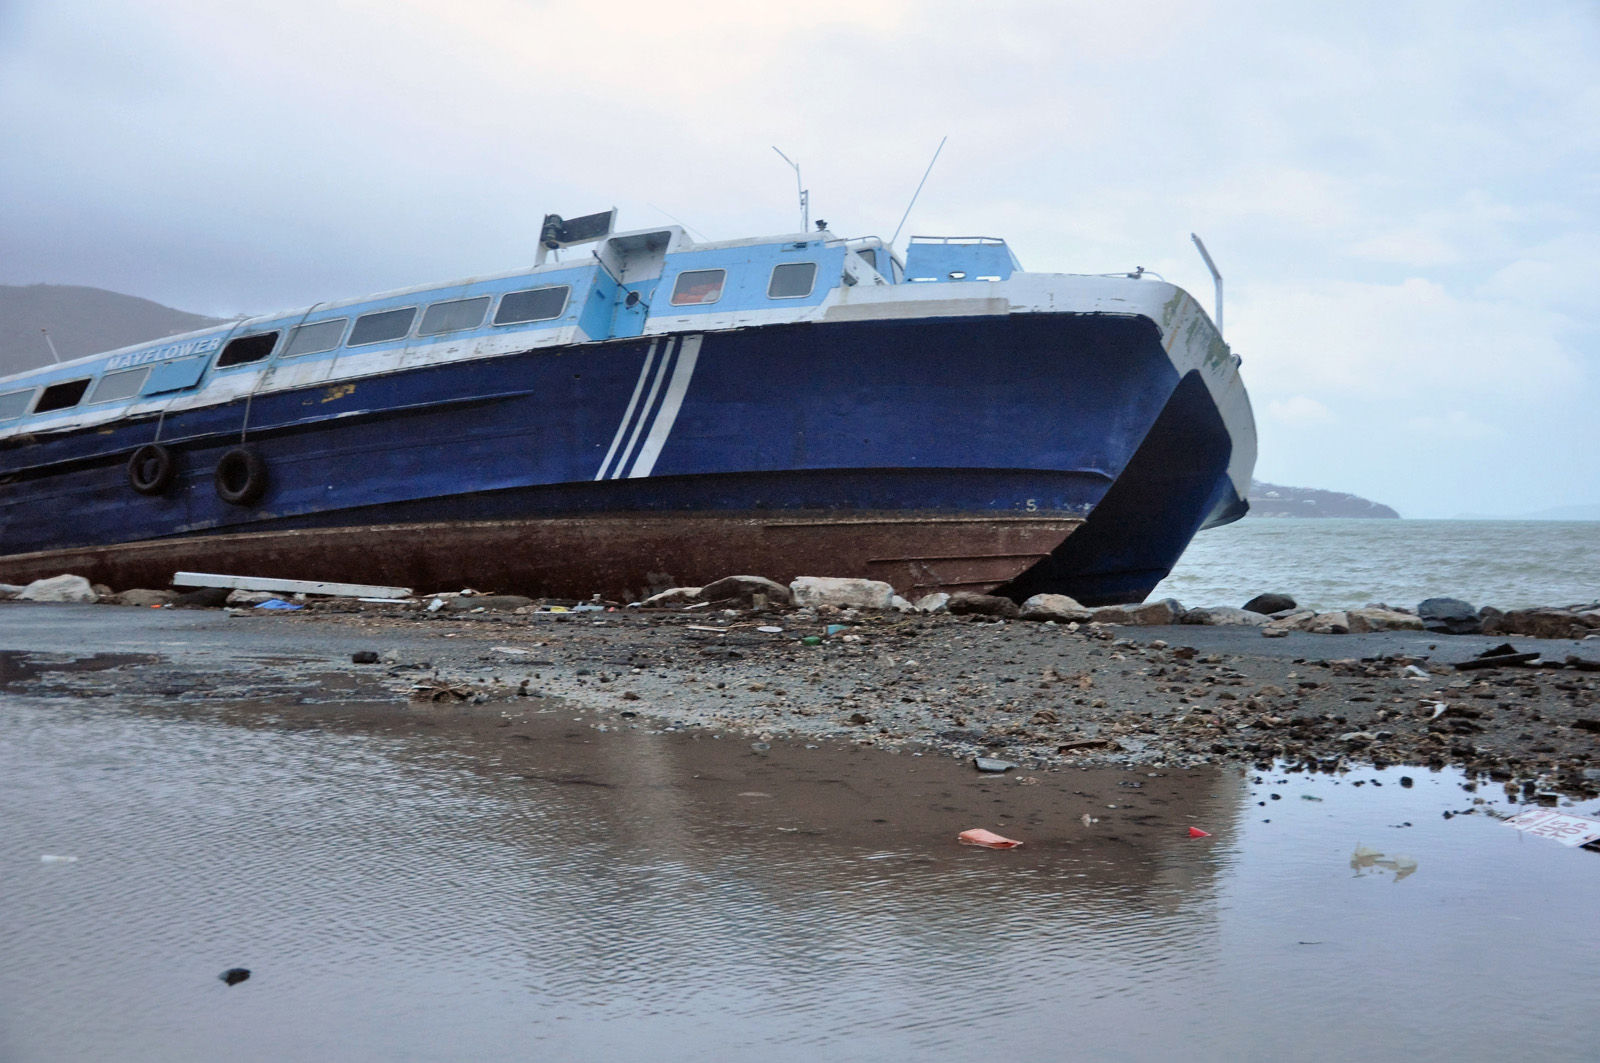 A ferry beached last week by Hurricane Irma in Road Town, Tortola, the capital of the British Virgin Islands, remained unmoved after Hurricane Maria passed, early Wednesday, Sept. 20, 2017. (AP Photo/Freeman Rogers)